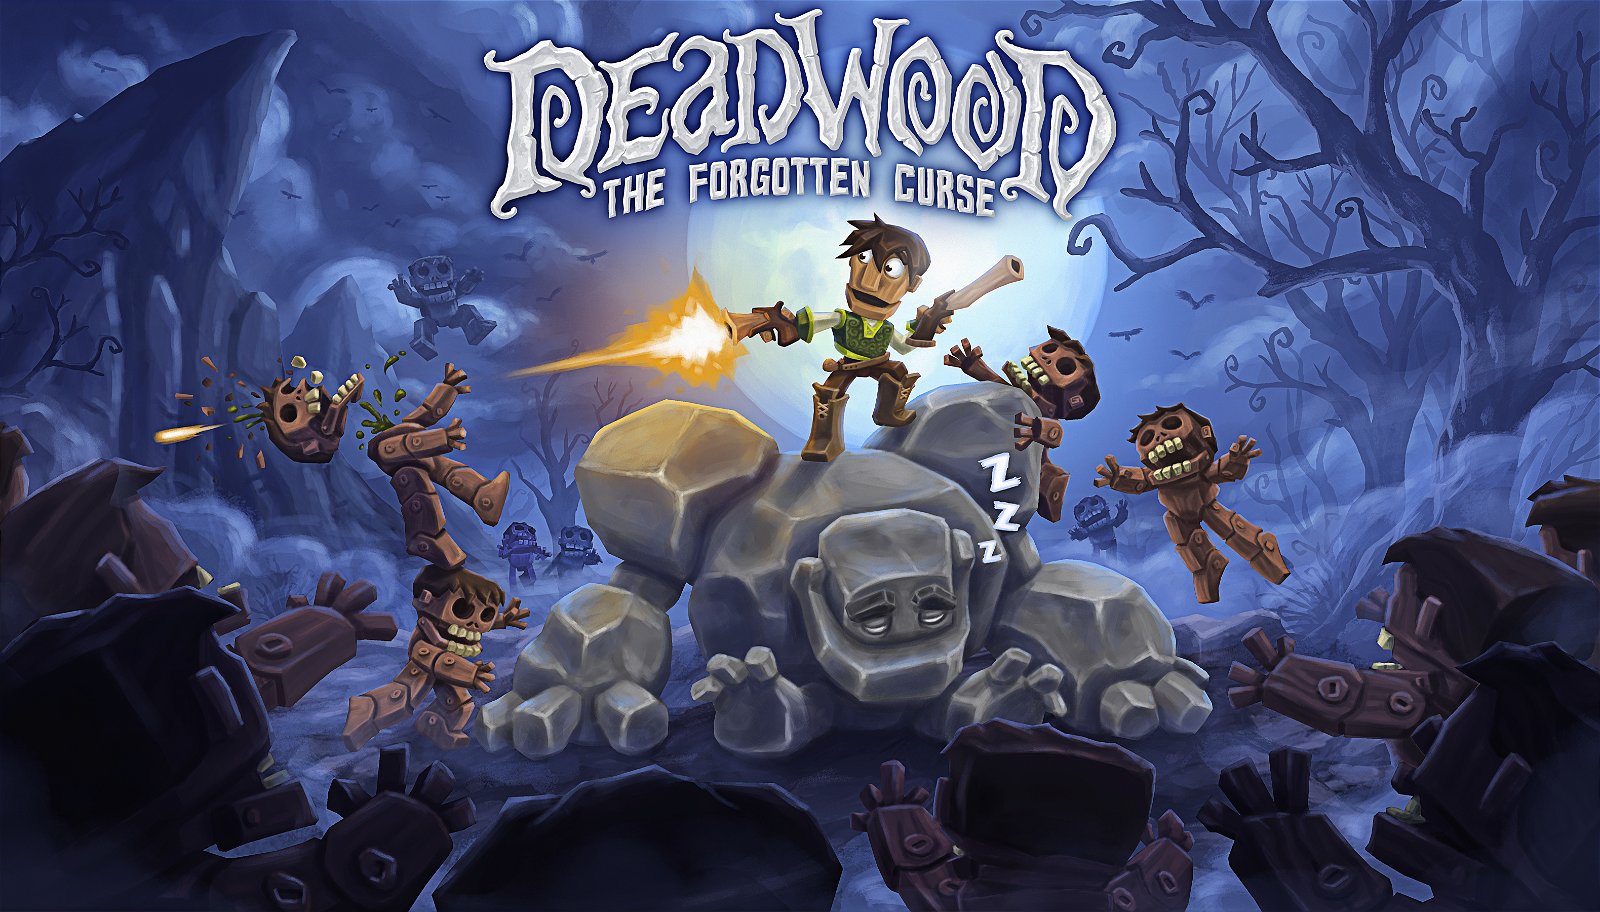 Image of Deadwood: The Forgotten Curse